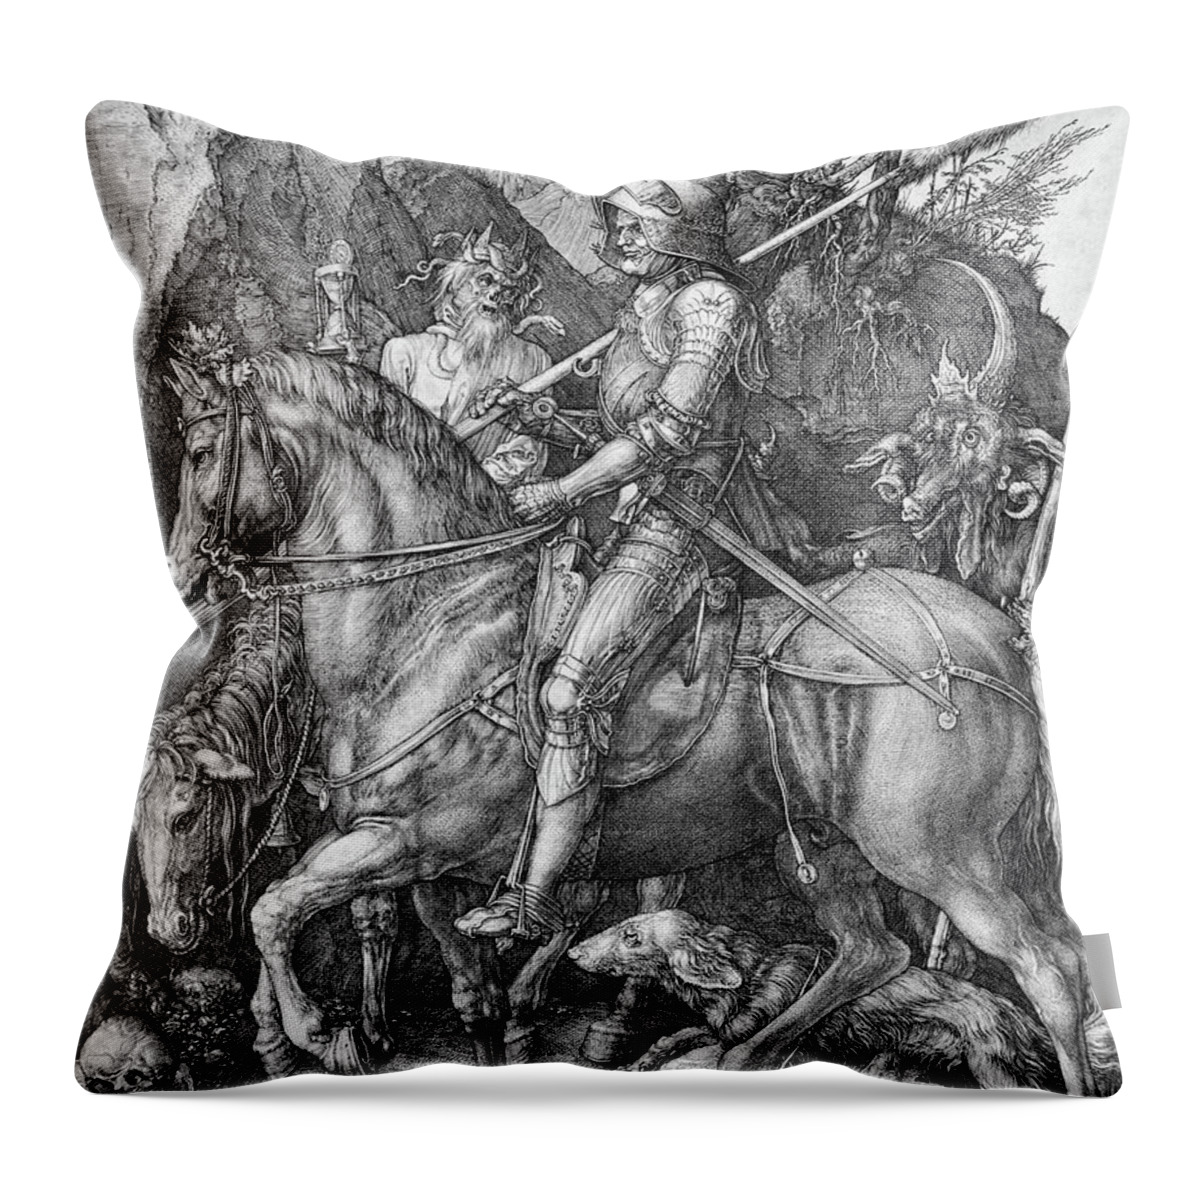 German Throw Pillow featuring the drawing Knight Death And The Devil by Troy Caperton